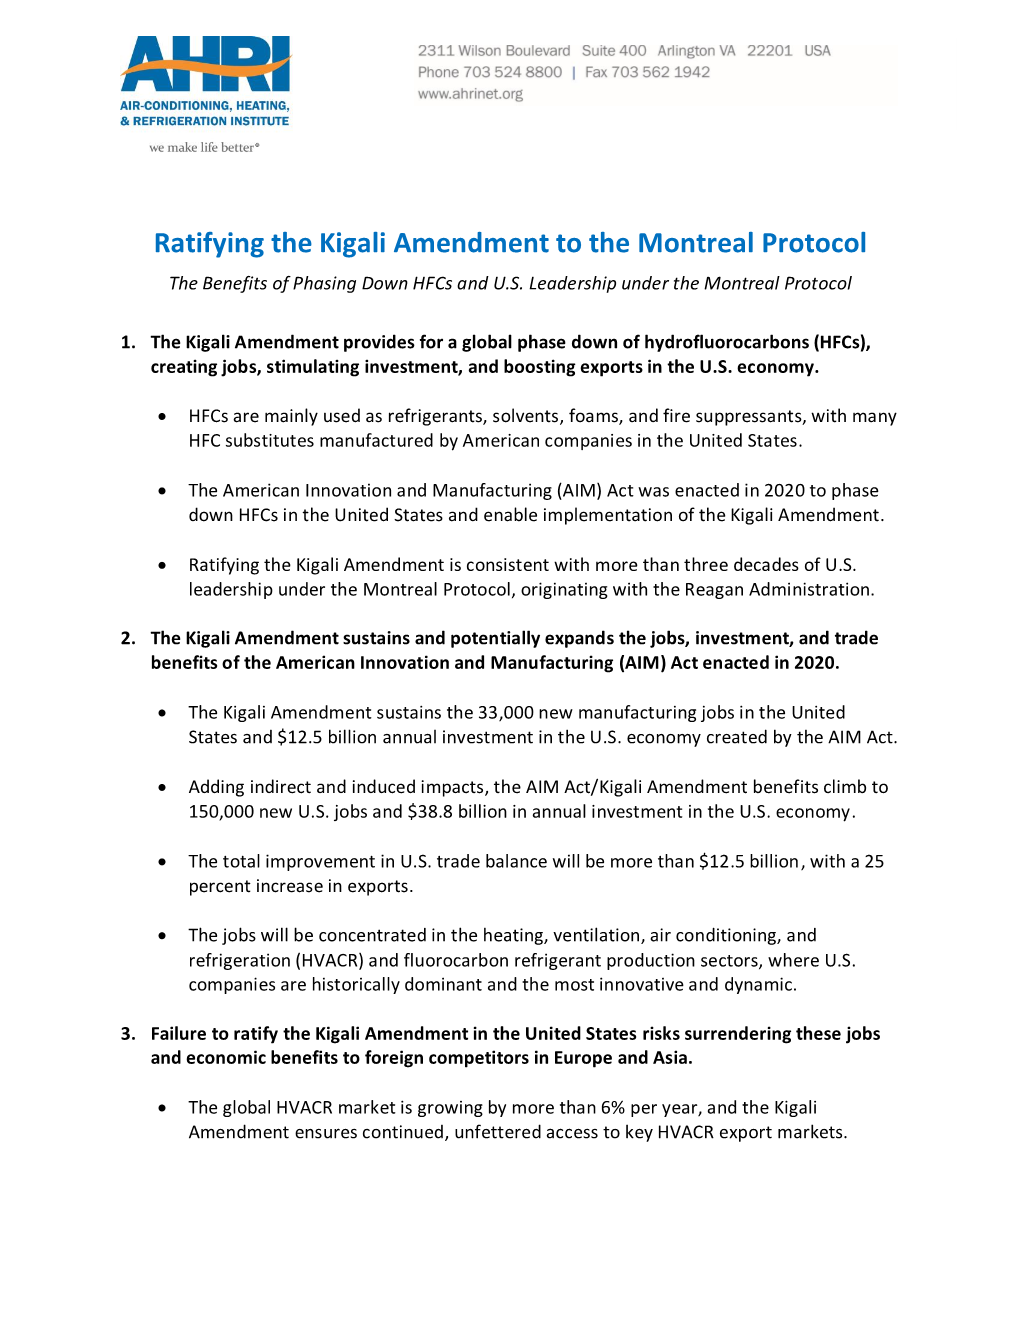 Ratifying the Kigali Amendment to the Montreal Protocol the Benefits of Phasing Down Hfcs and U.S